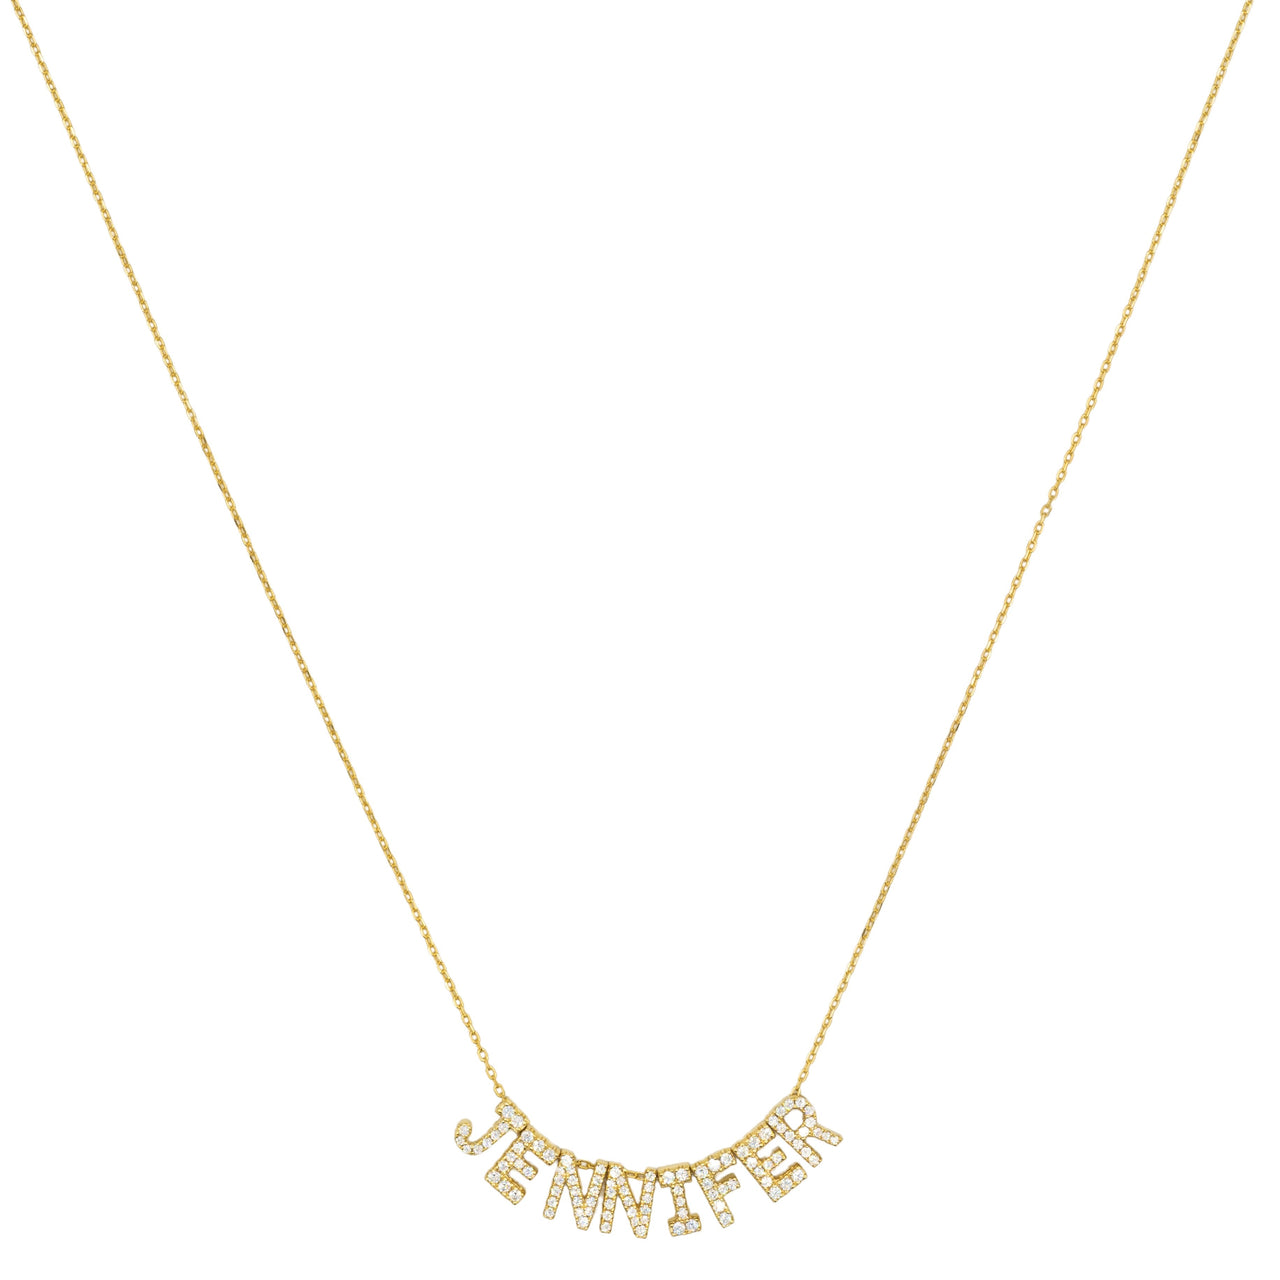 The Personalized Dainty Gold Necklace